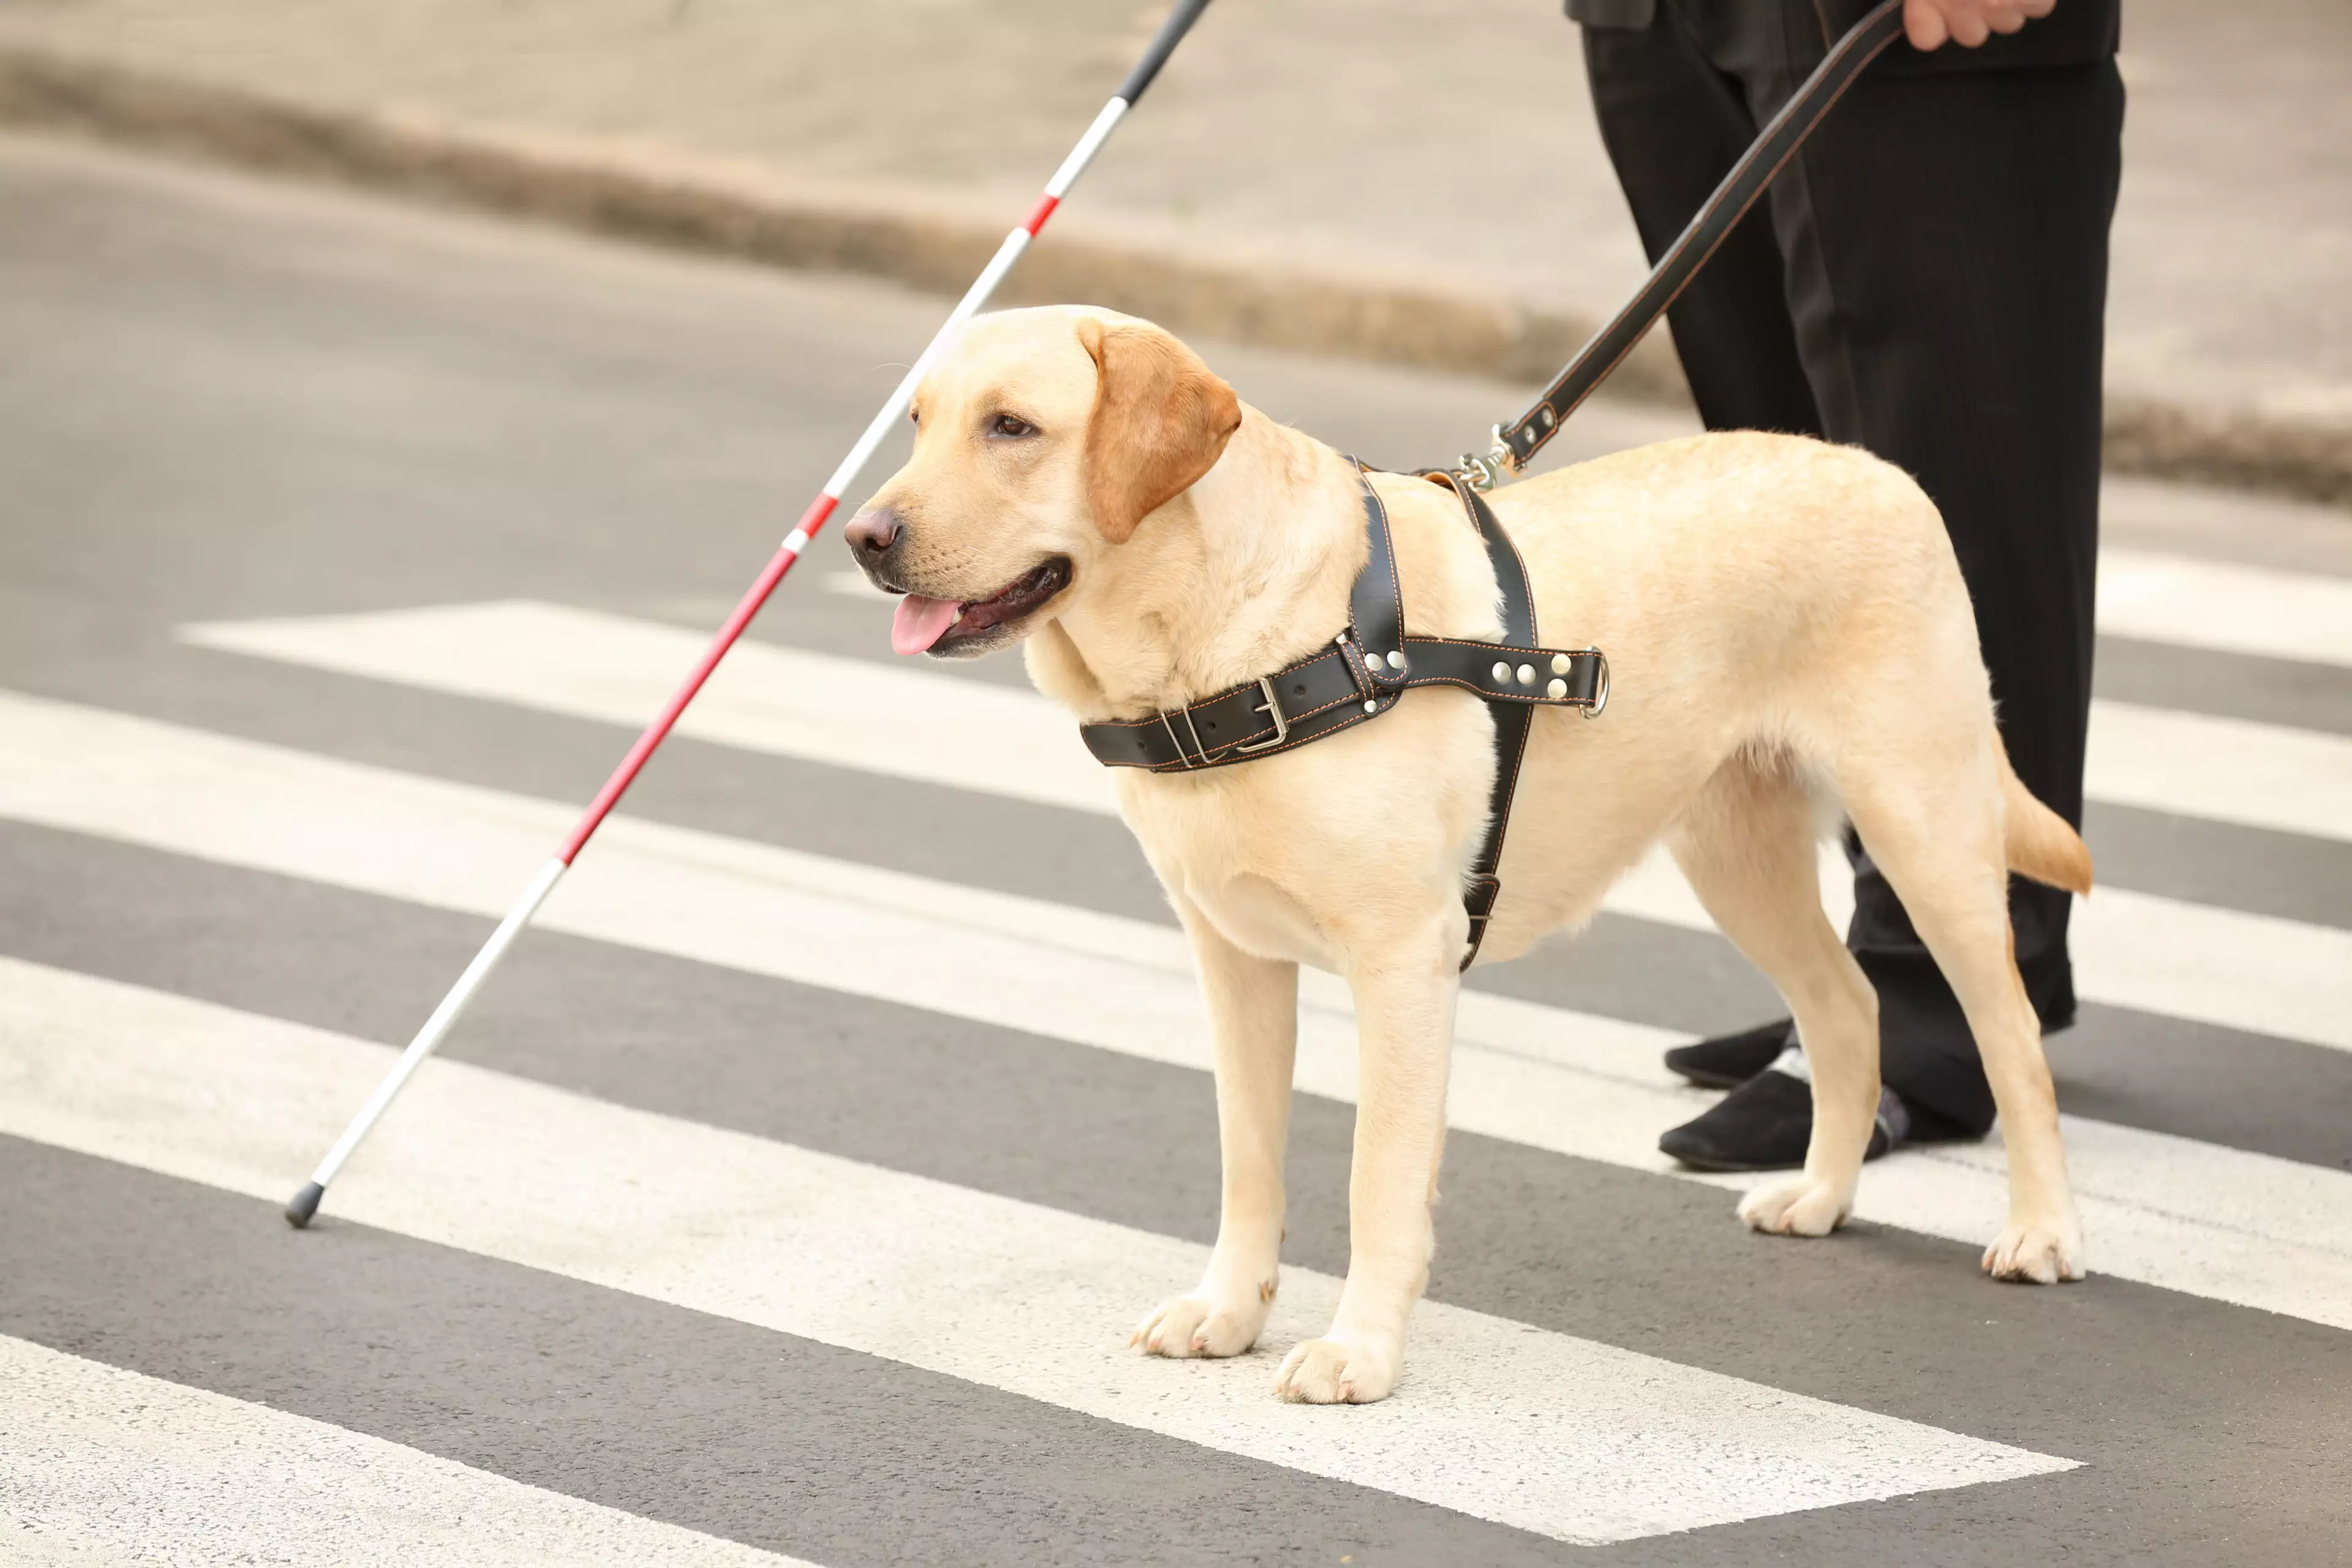 Stock image of guide dog.